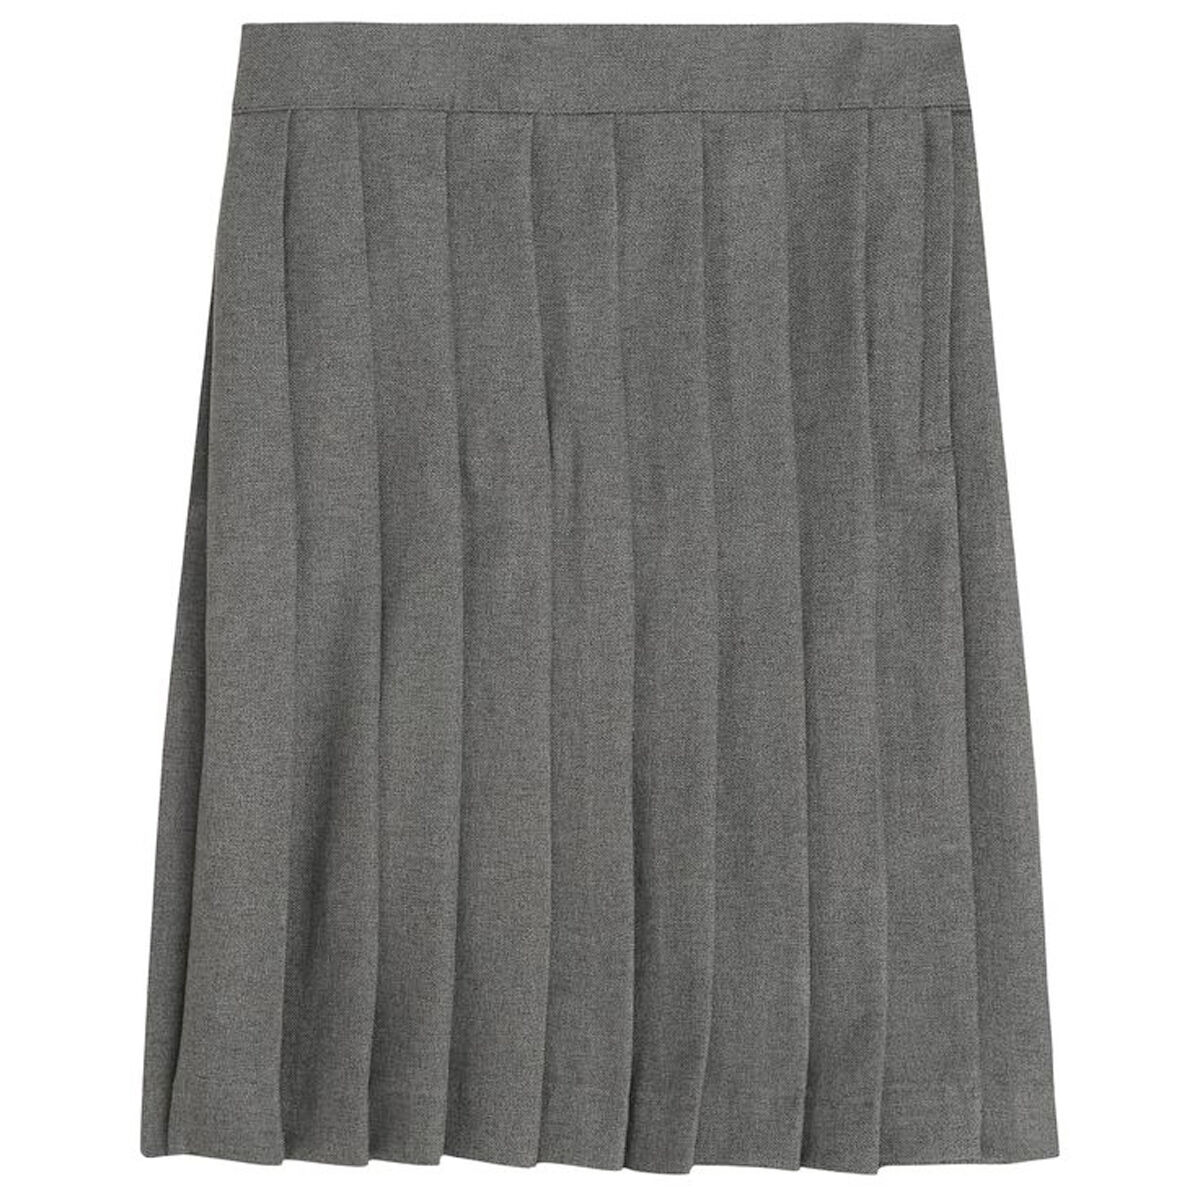 Girls Gray Pleated Skirt French Toast School Uniform Sizes 4 To 20